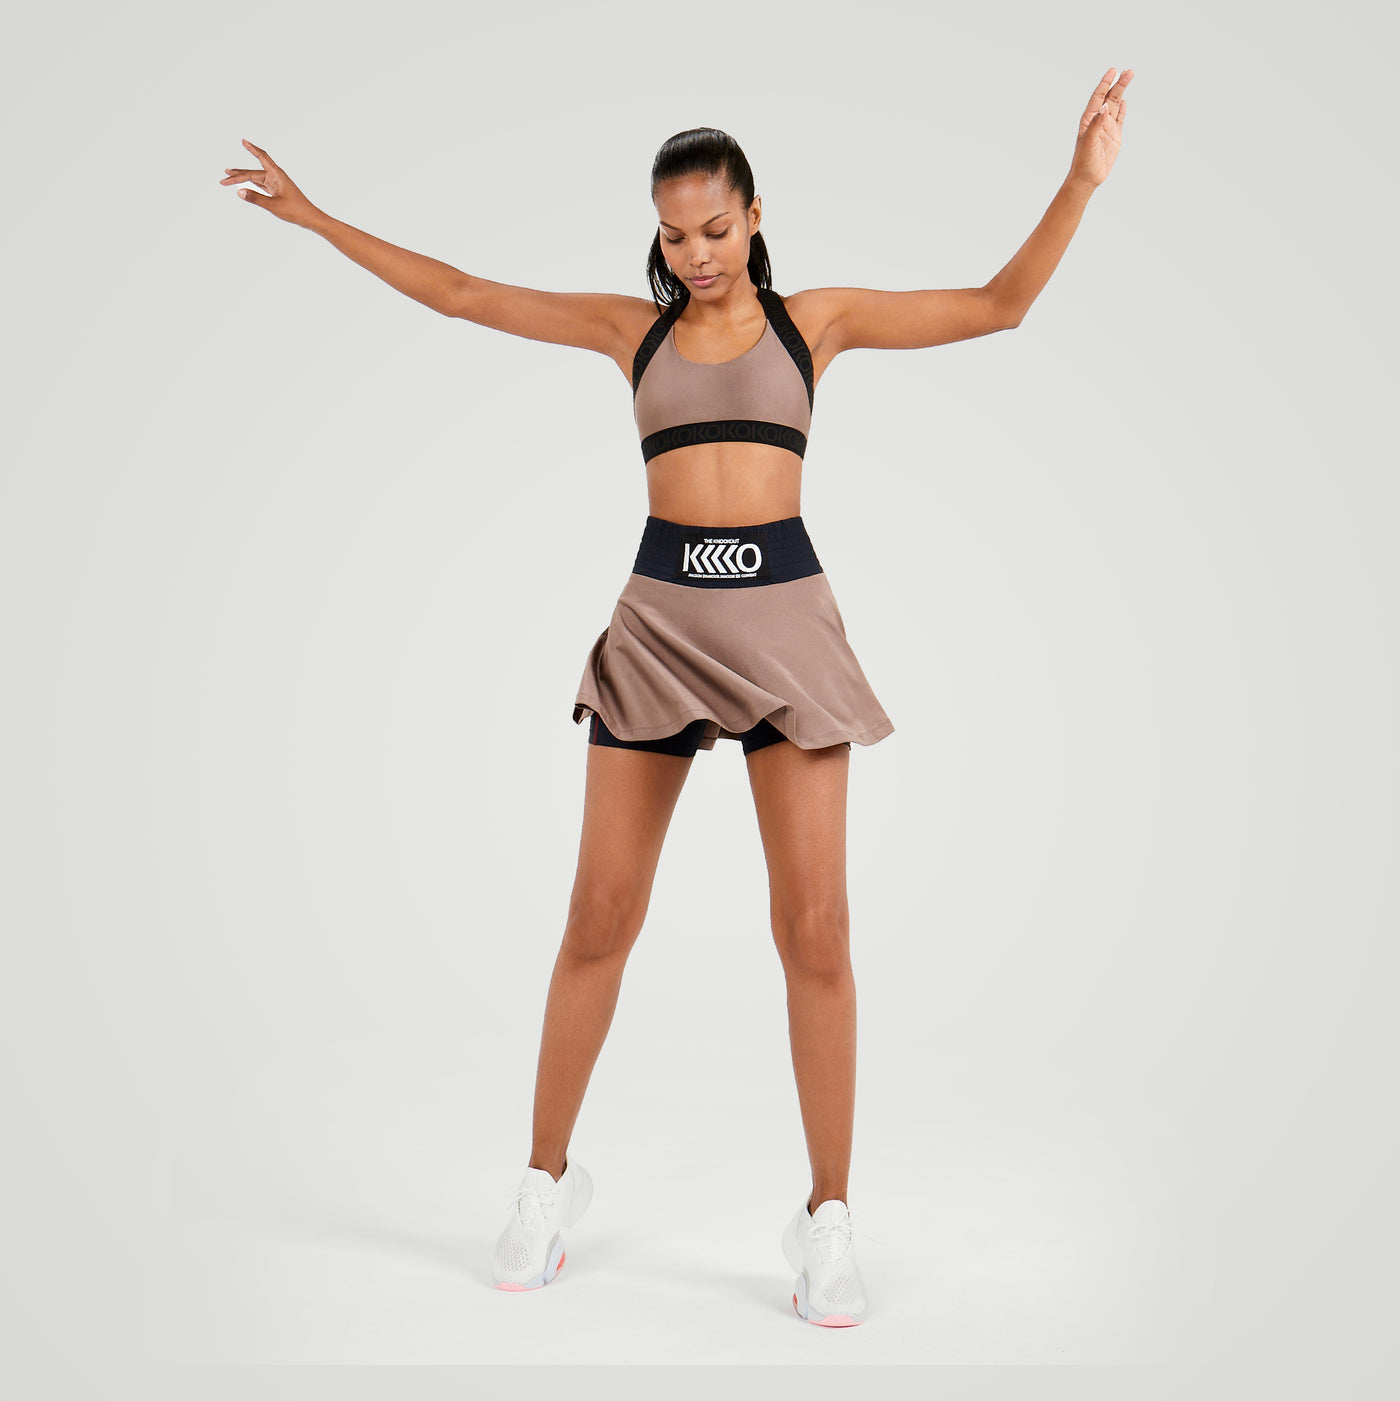 The Knockout Paris Fitness Skirt Fighting skirt in stardust